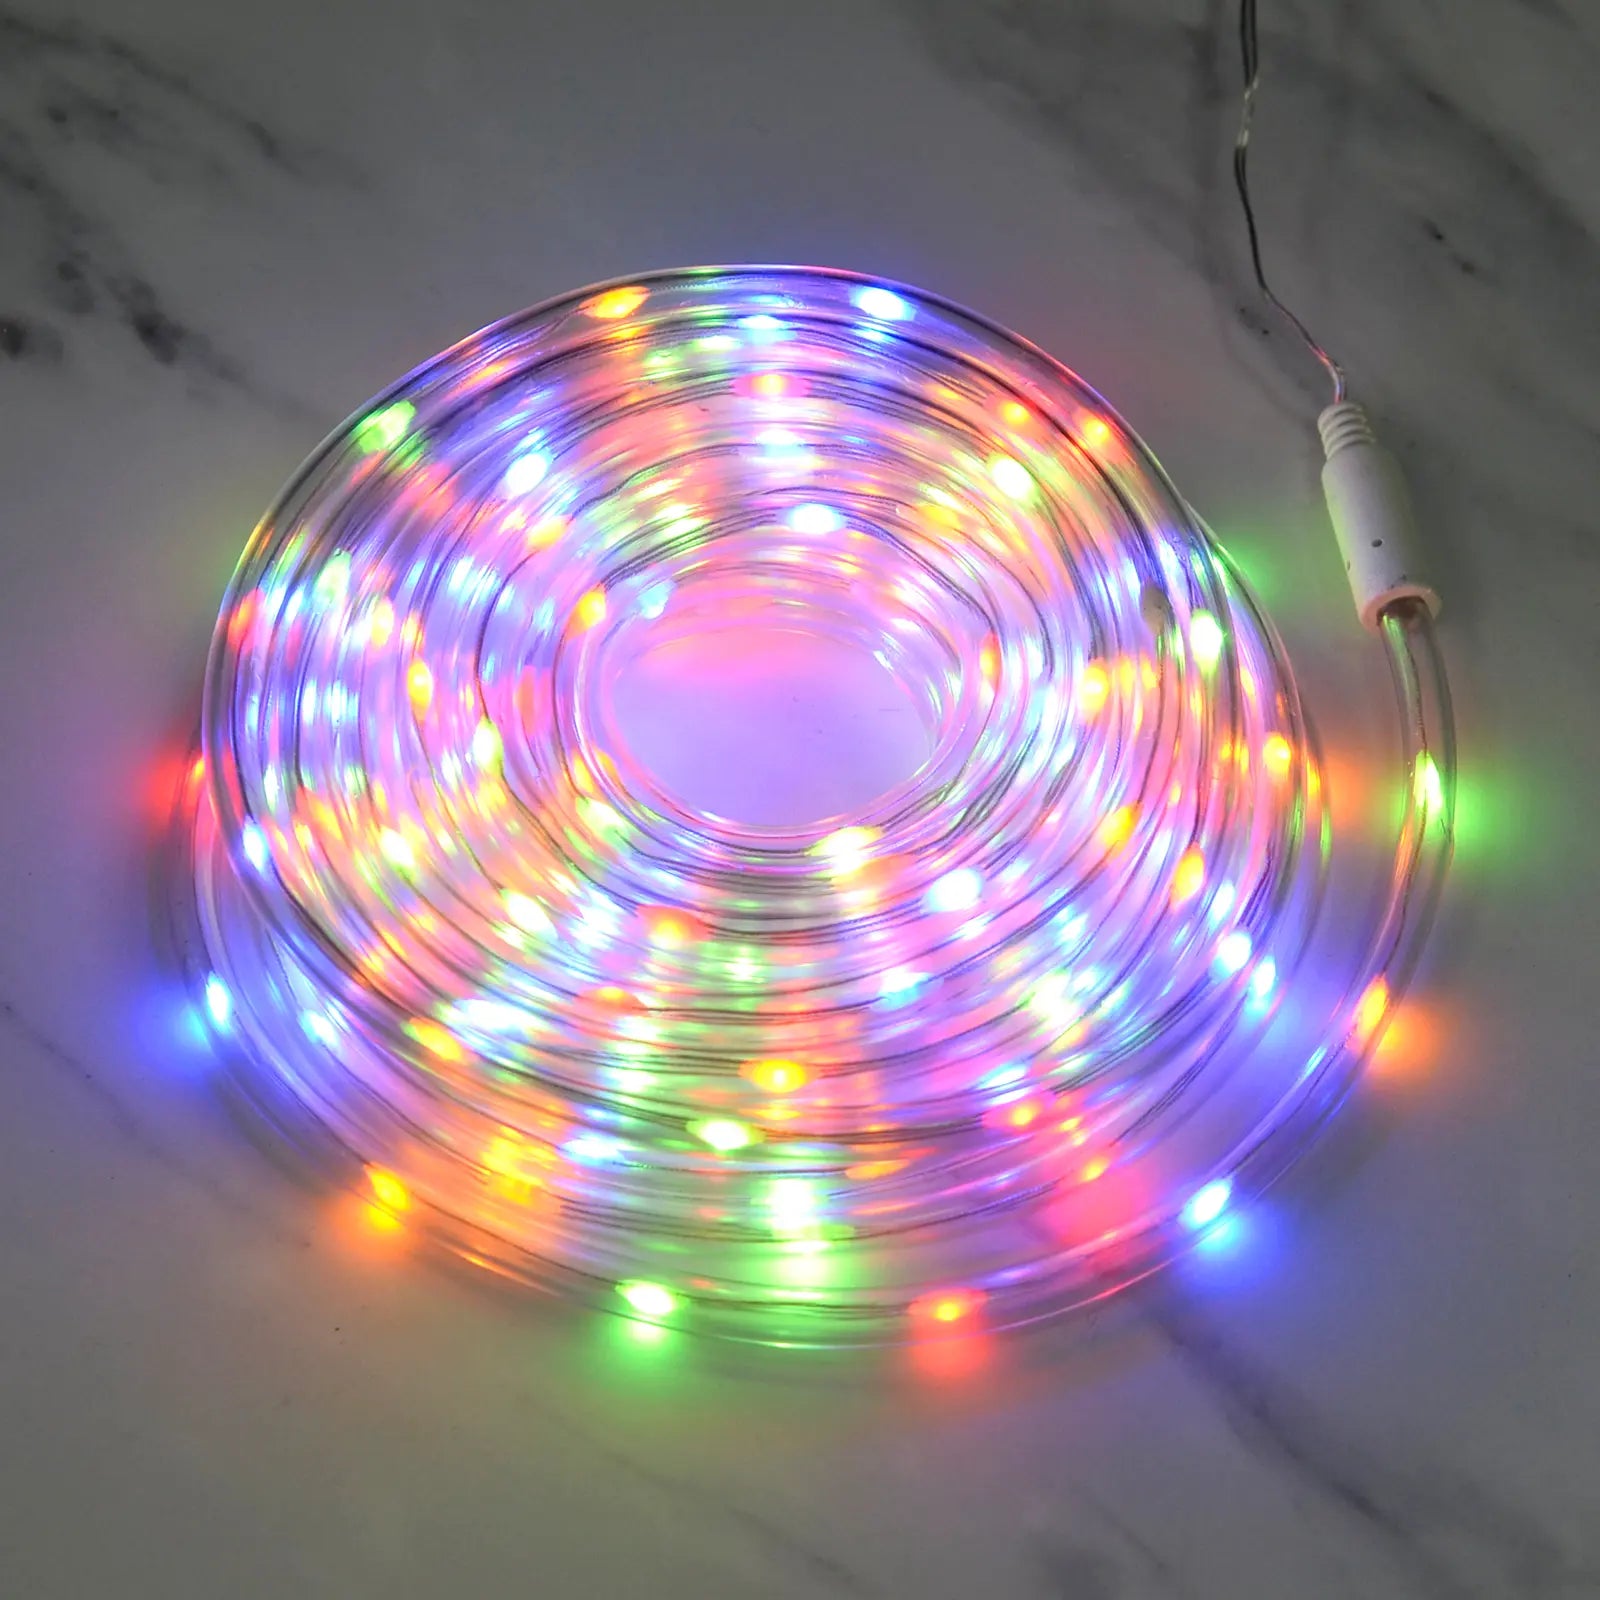 Coil of multicolour LED rope light lit up on a marble floor